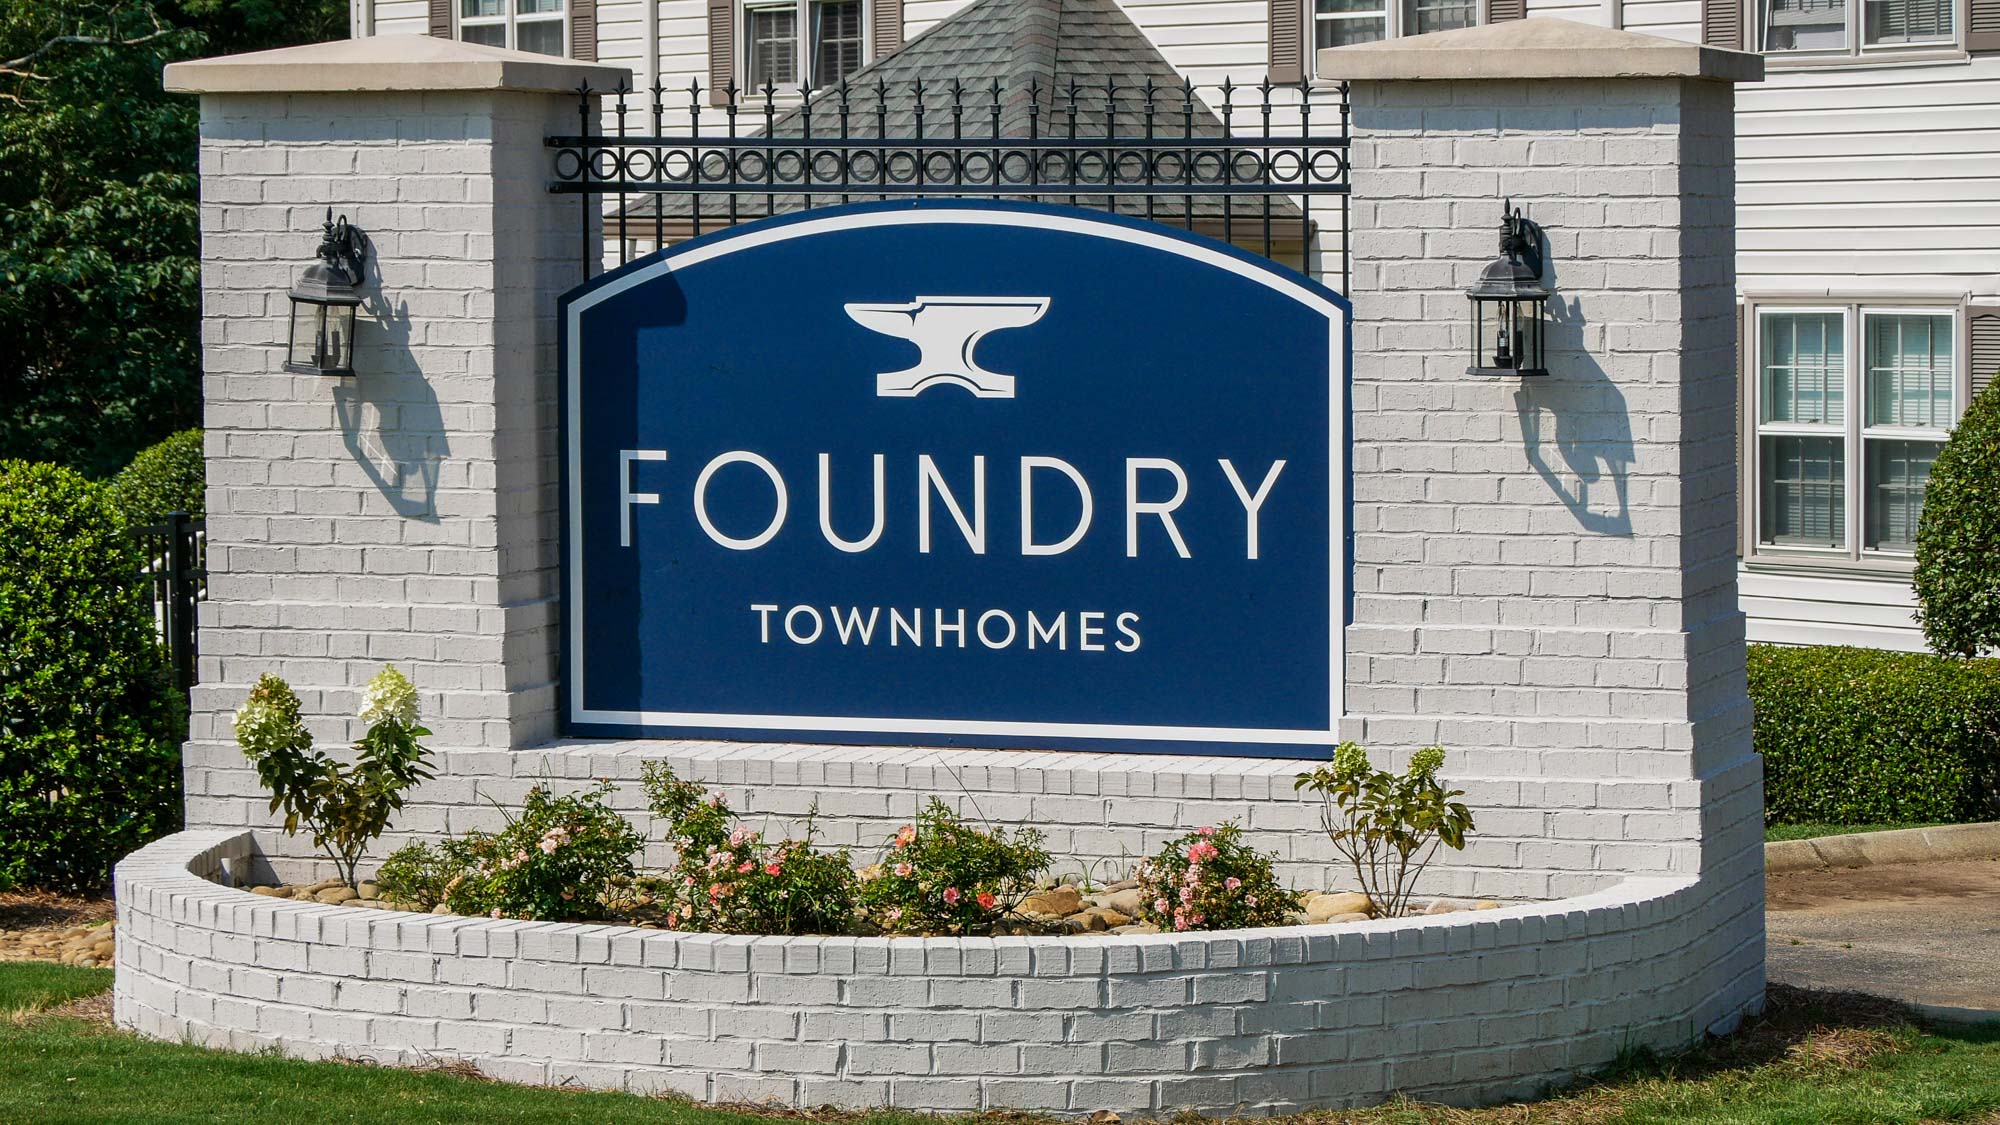 Foundry Townhomes in Simpsonville, South Carolina.